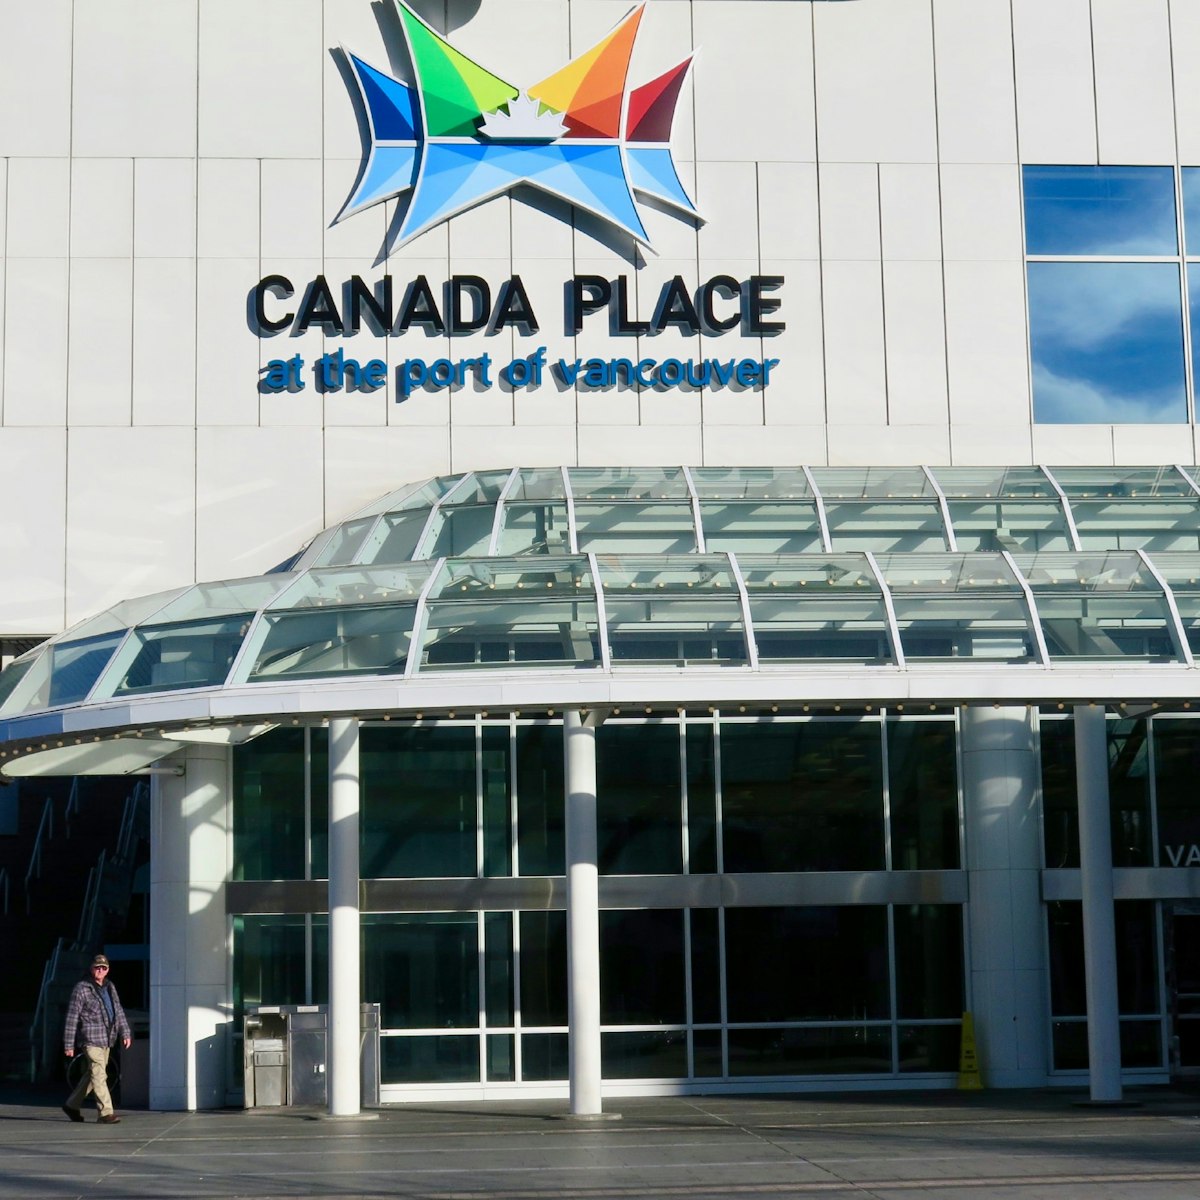 Exterior of Vancouver's landmark Canada Place  building